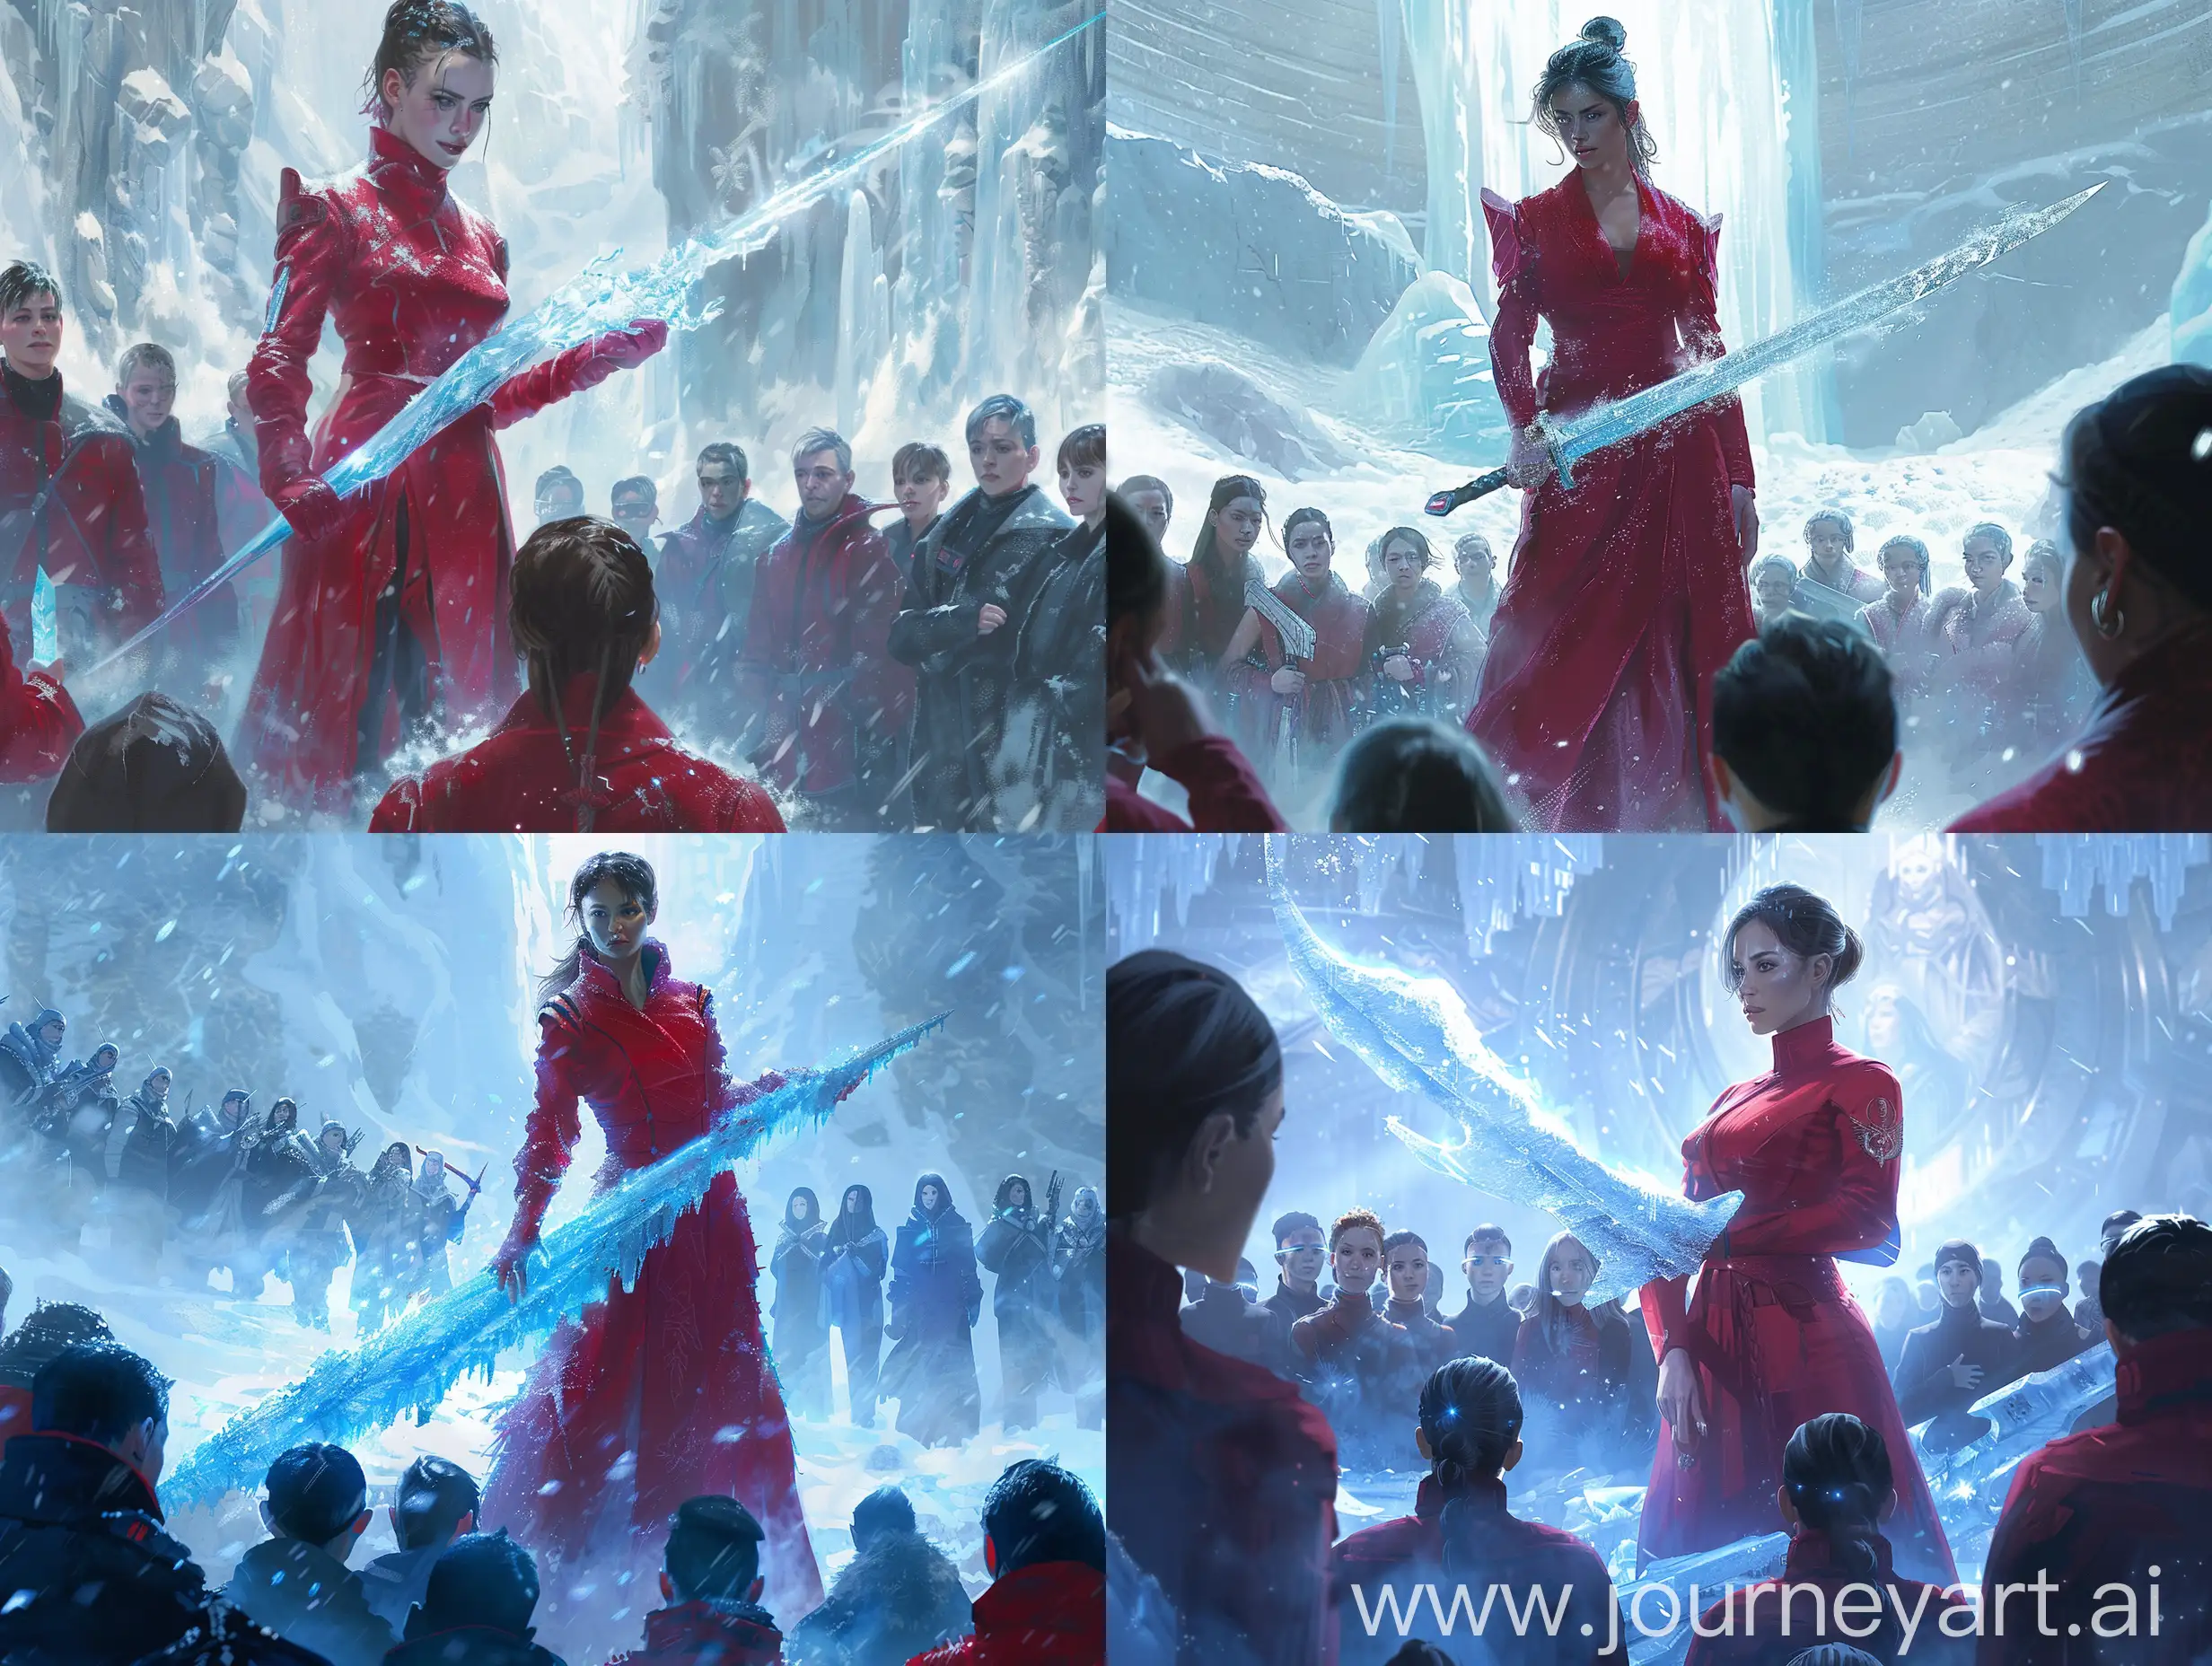 In the ethereal realm of futuristic ice world harmony, the woman stands resolute in her crimson attire, a beacon of strength and leadership amidst the frozen expanse. With a sword forged from shimmering ice cradled in her hand, she embodies both grace and power, ready to defend her companions and preserve the tranquility of this celestial domain. The crowd surrounding her, their faces aglow with reverence, symbolizes the unity and solidarity of this icy world community. As the icy winds whisper tales of ancient heroism, the woman's presence ignites a sense of hope and determination, casting a luminous aura of harmony across the crystalline landscape.